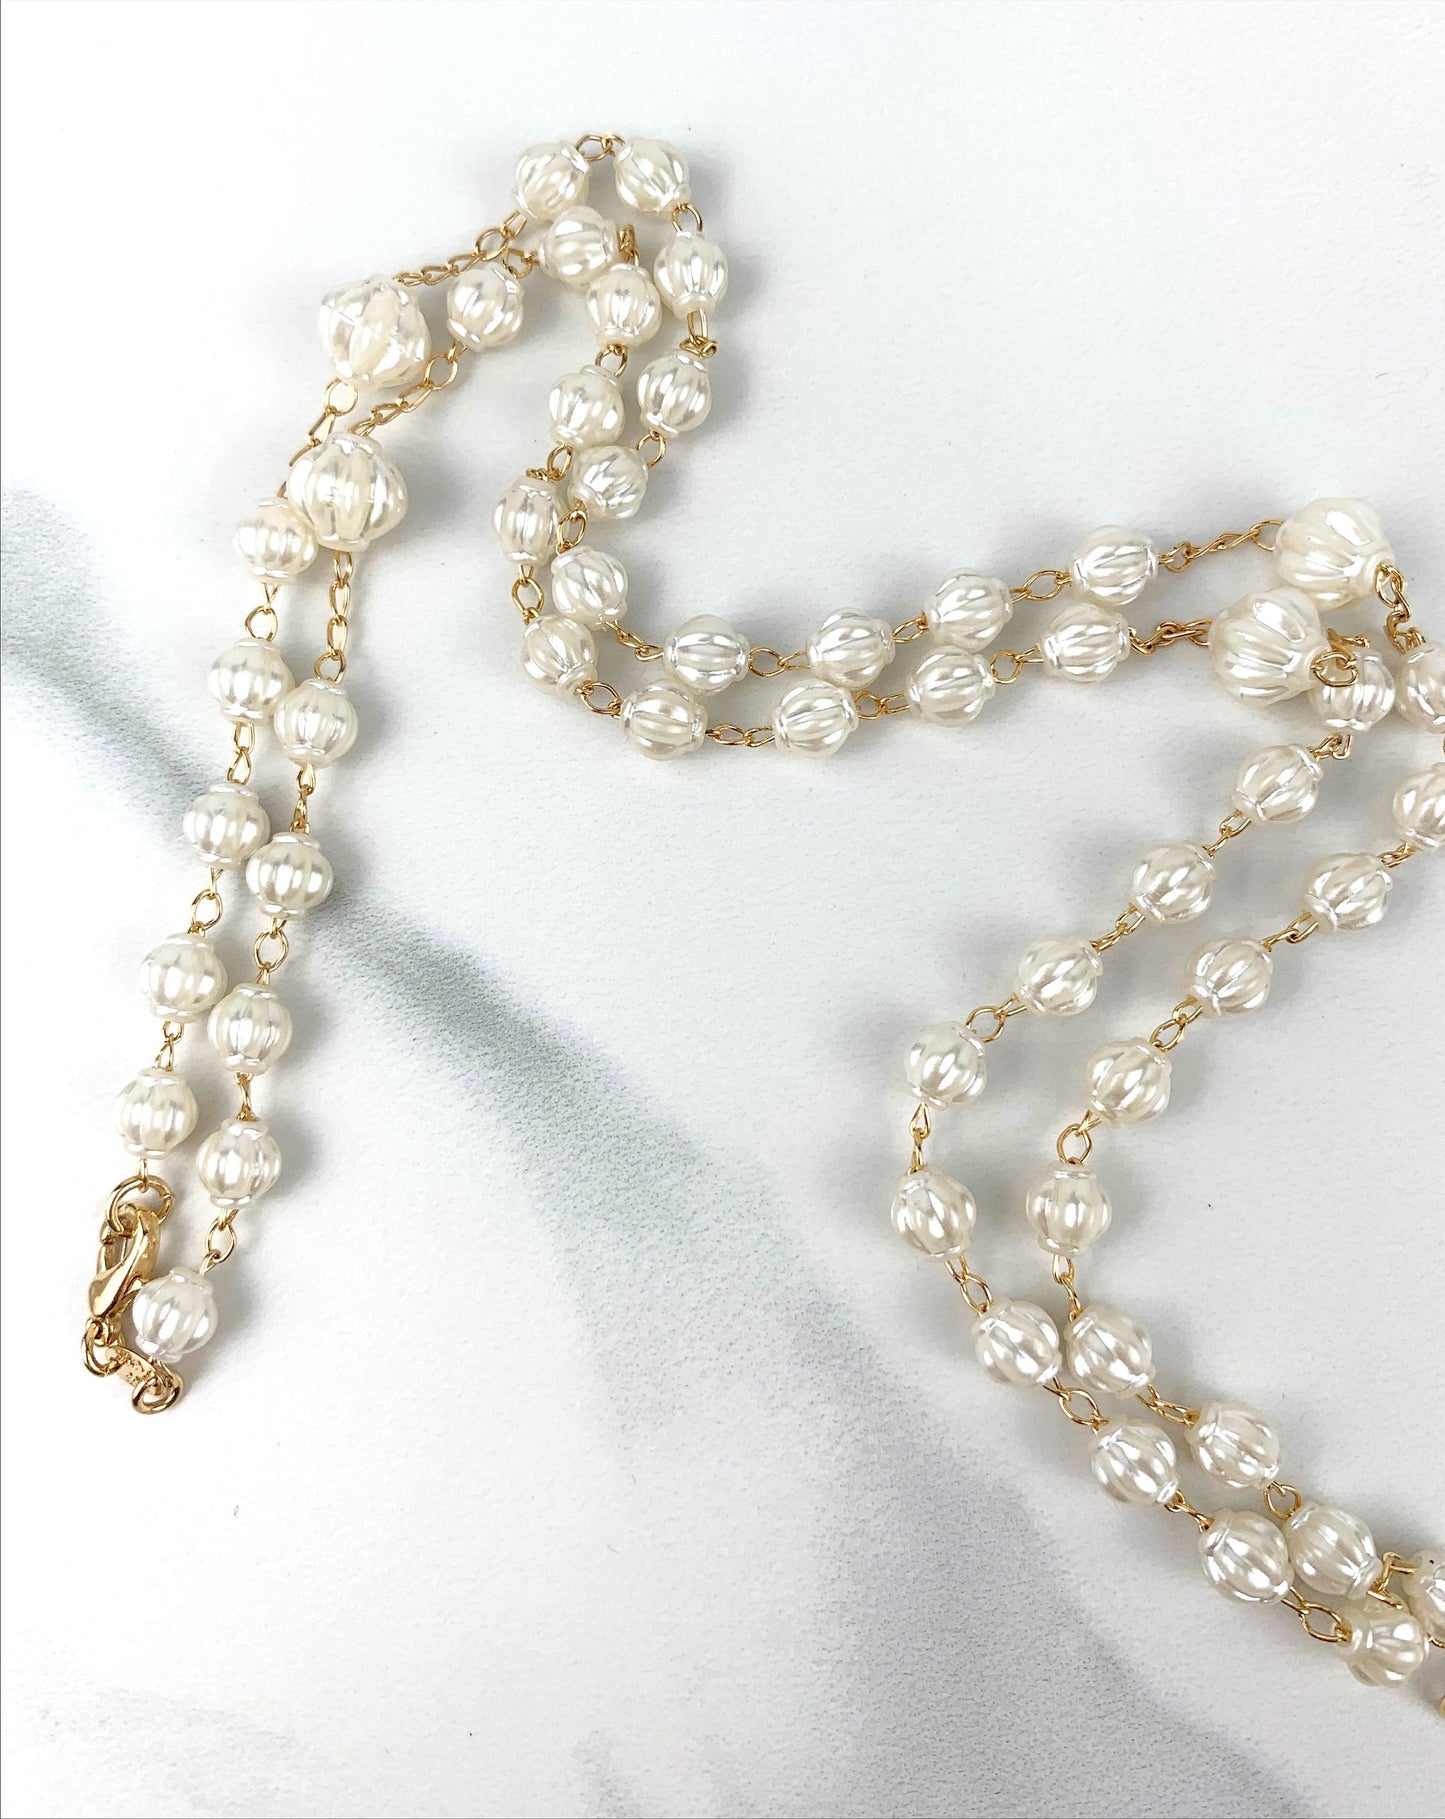 18k Gold Filled Simulated Pearls La Milagrosa, Miraculous Virgin Rosary Necklace, Religious Jewelry, Wholesale Jewelry Making Supplies